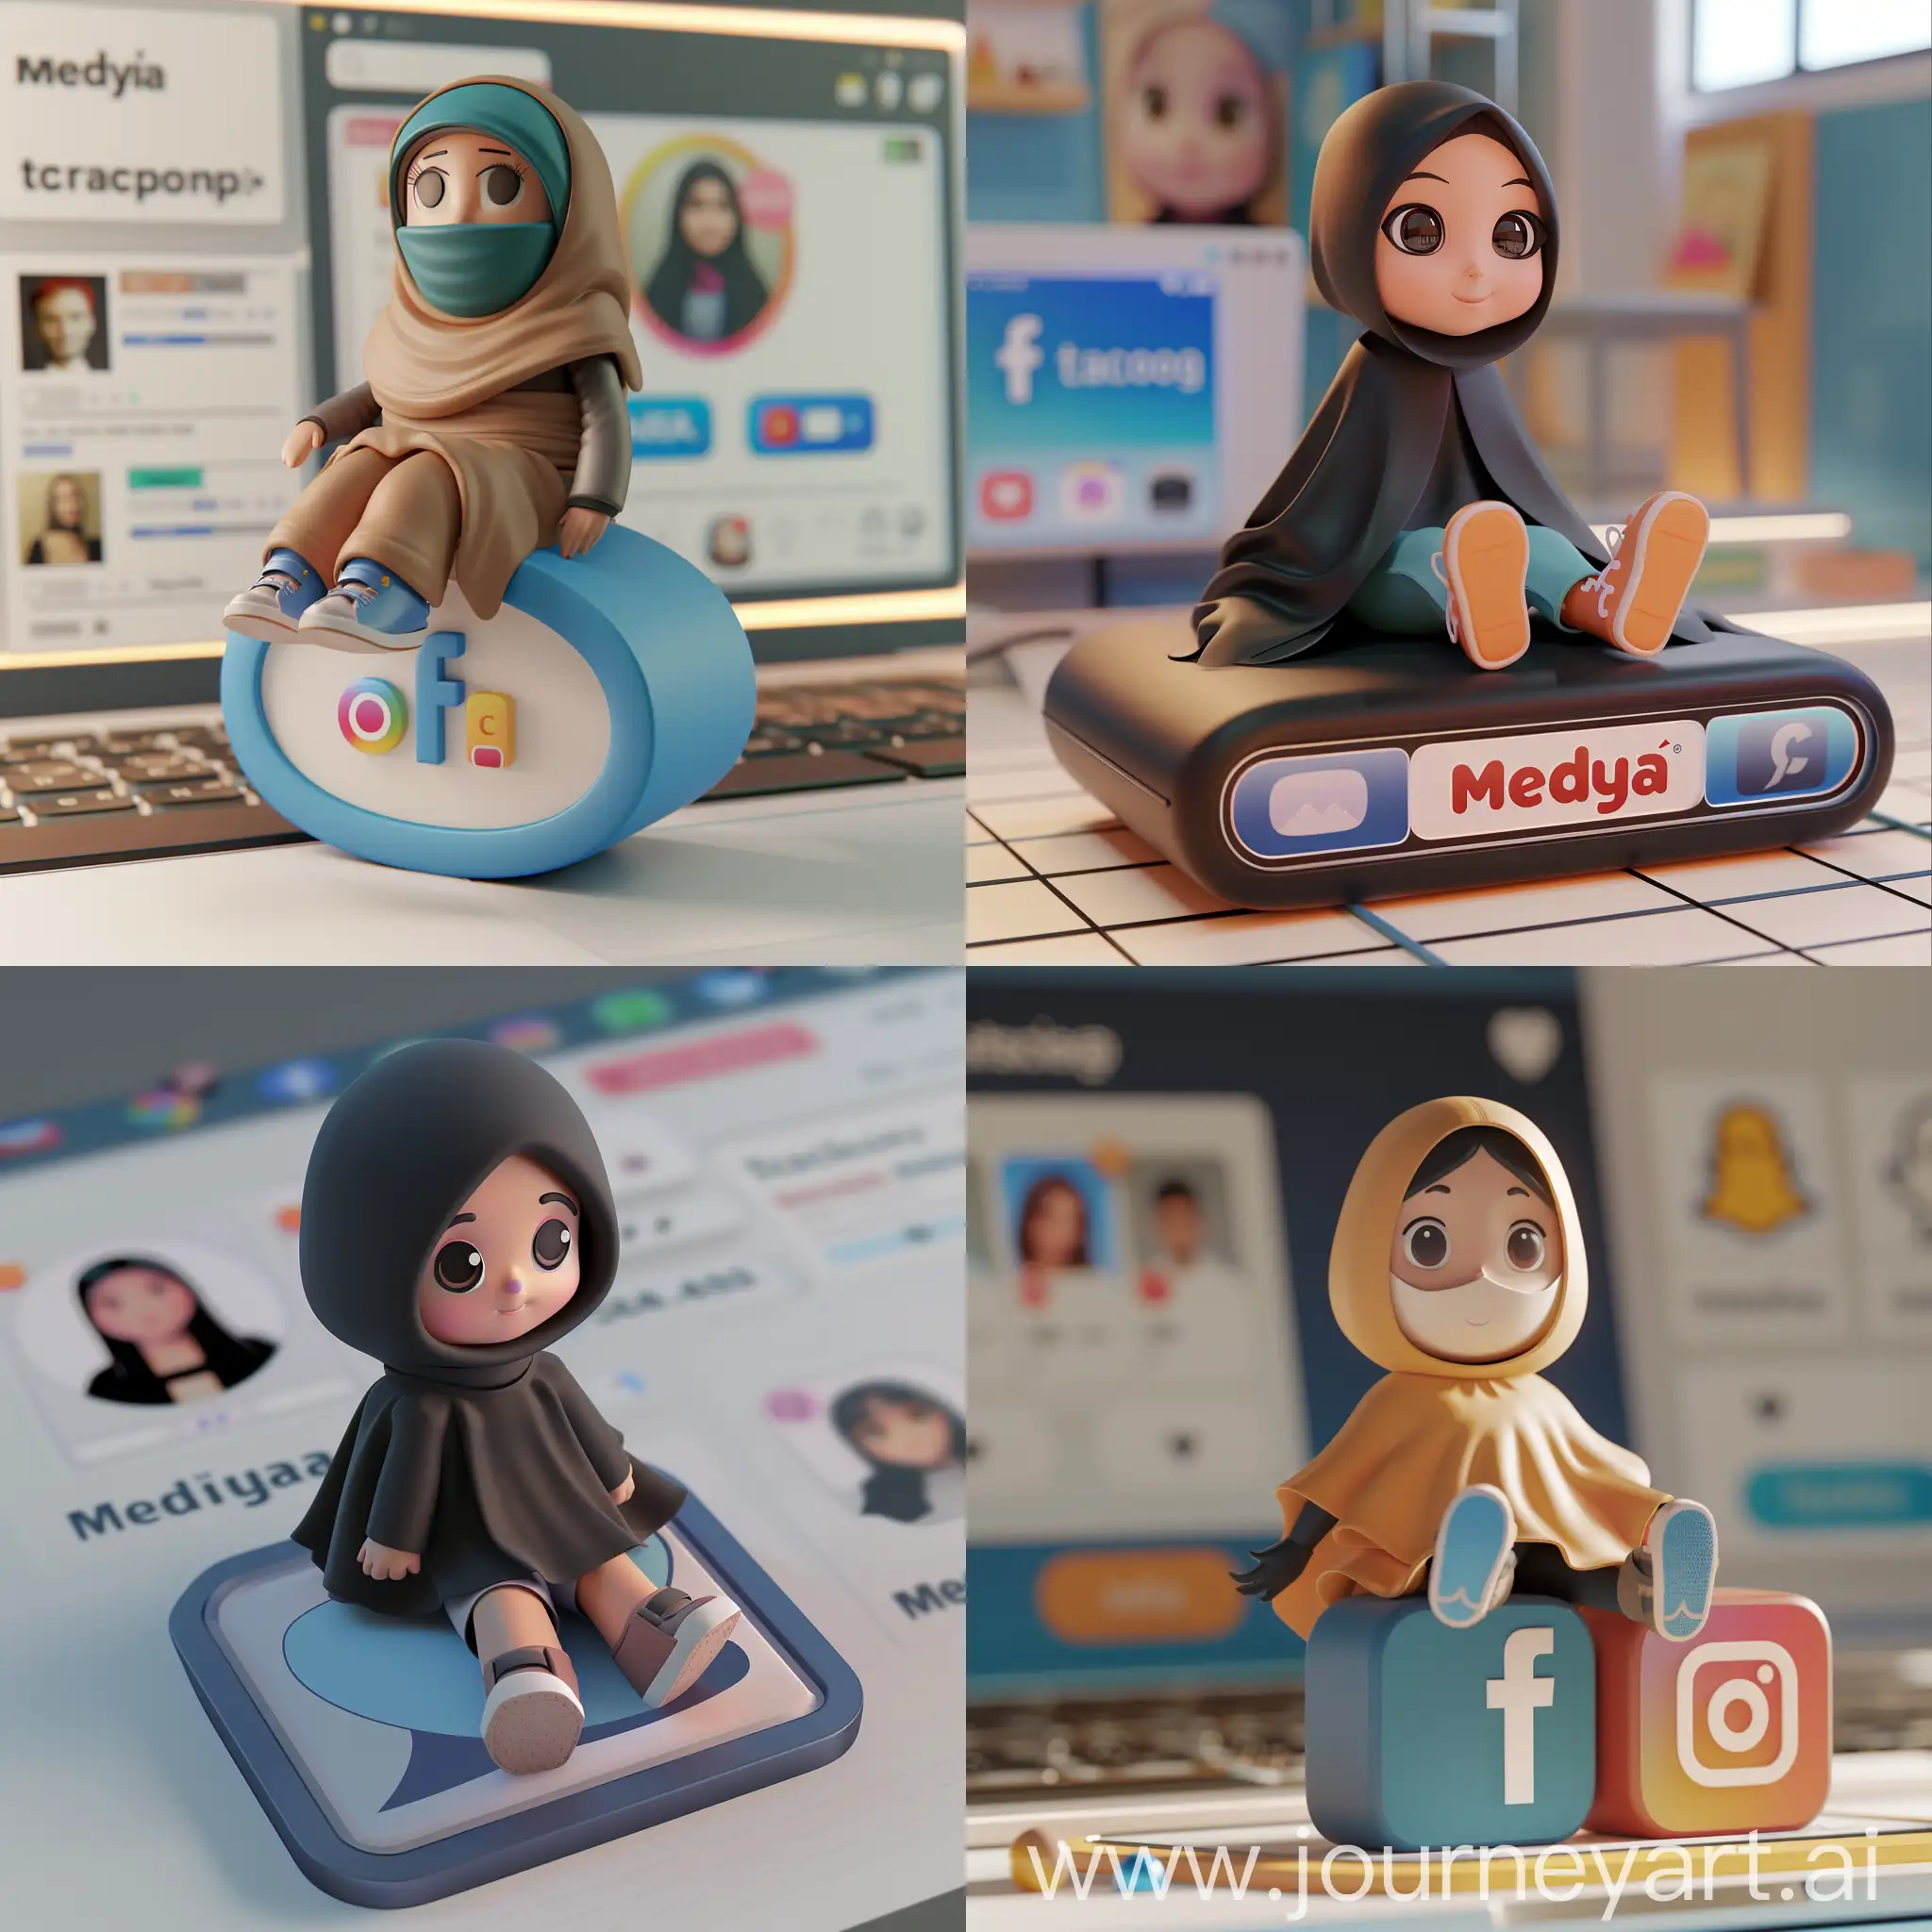 Create a 3D illustration of an animated girel  character sitting casually on top of a social media logo "instagram". The character must wear niqab clothing such shoes. The background of the image is a social media profile page with a user name "Medya" and a profile picture that match.